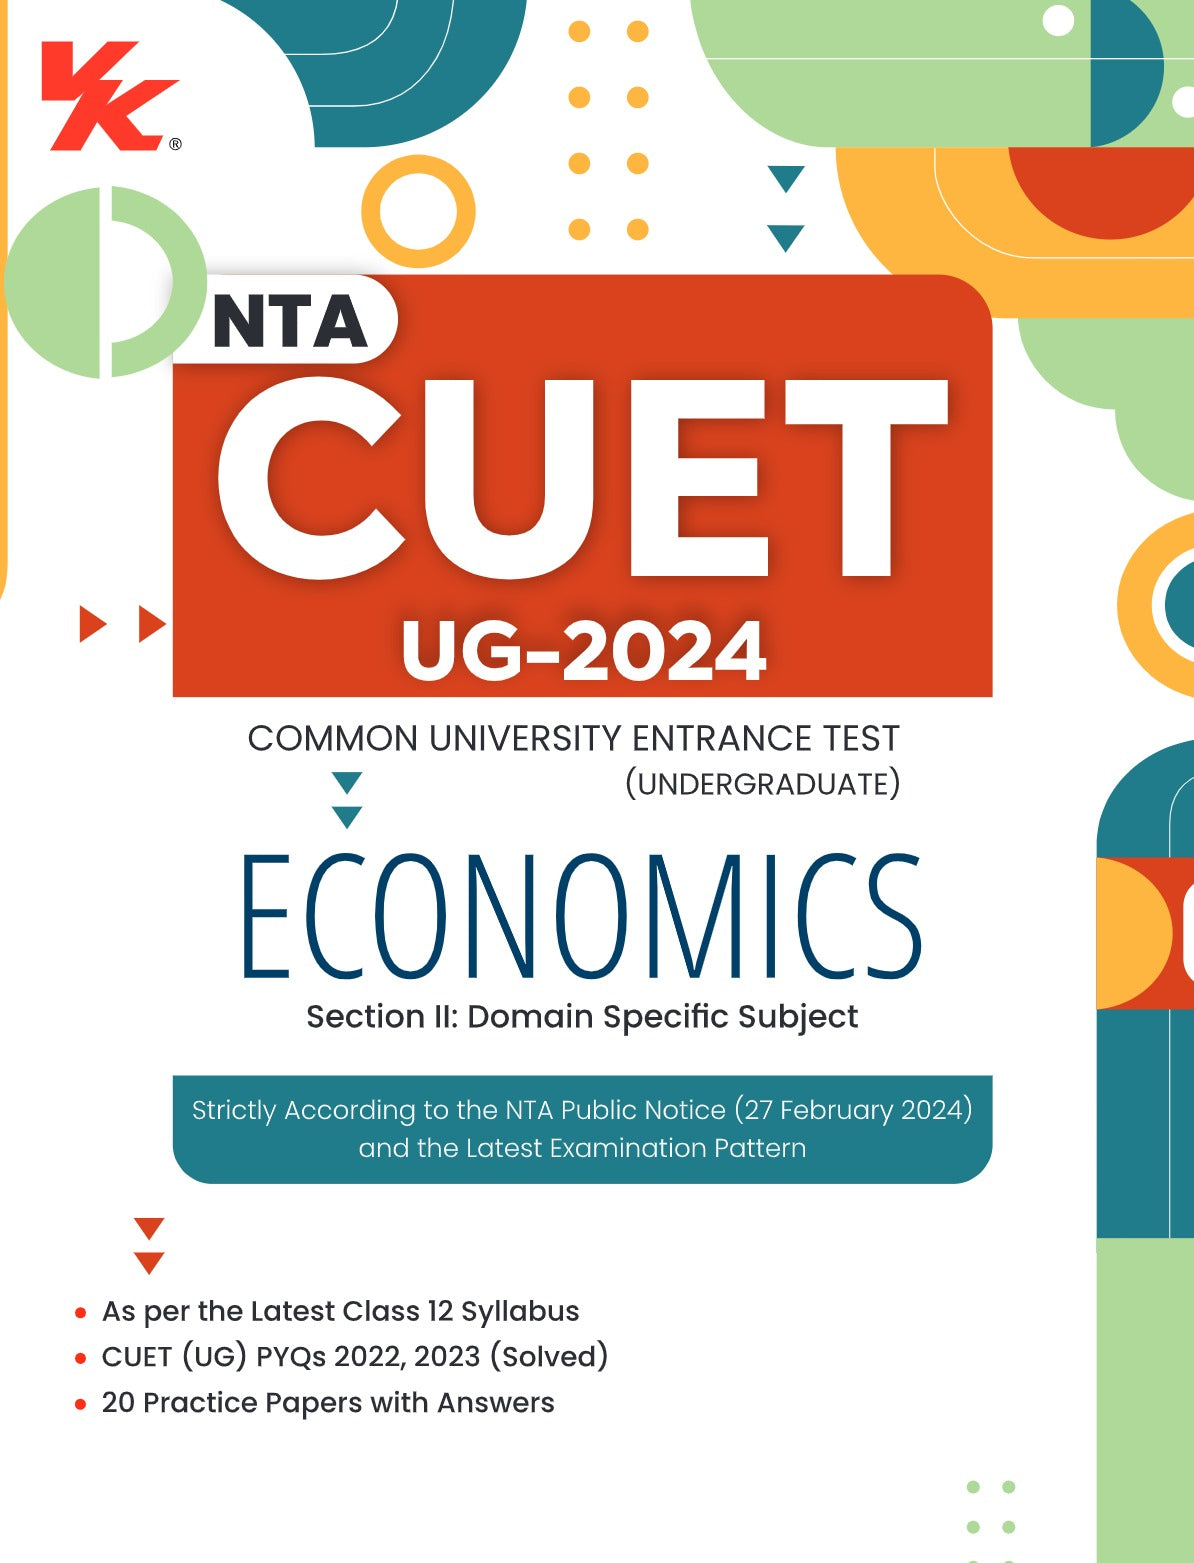 NTA CUET (UG) Economics Book | 20 Practice Papers (Solved) | Common University Entrance Test | Including Solved Previous Year Question Papers (2022, 2023 ) | For Entrance Exam Preparation Book 2024